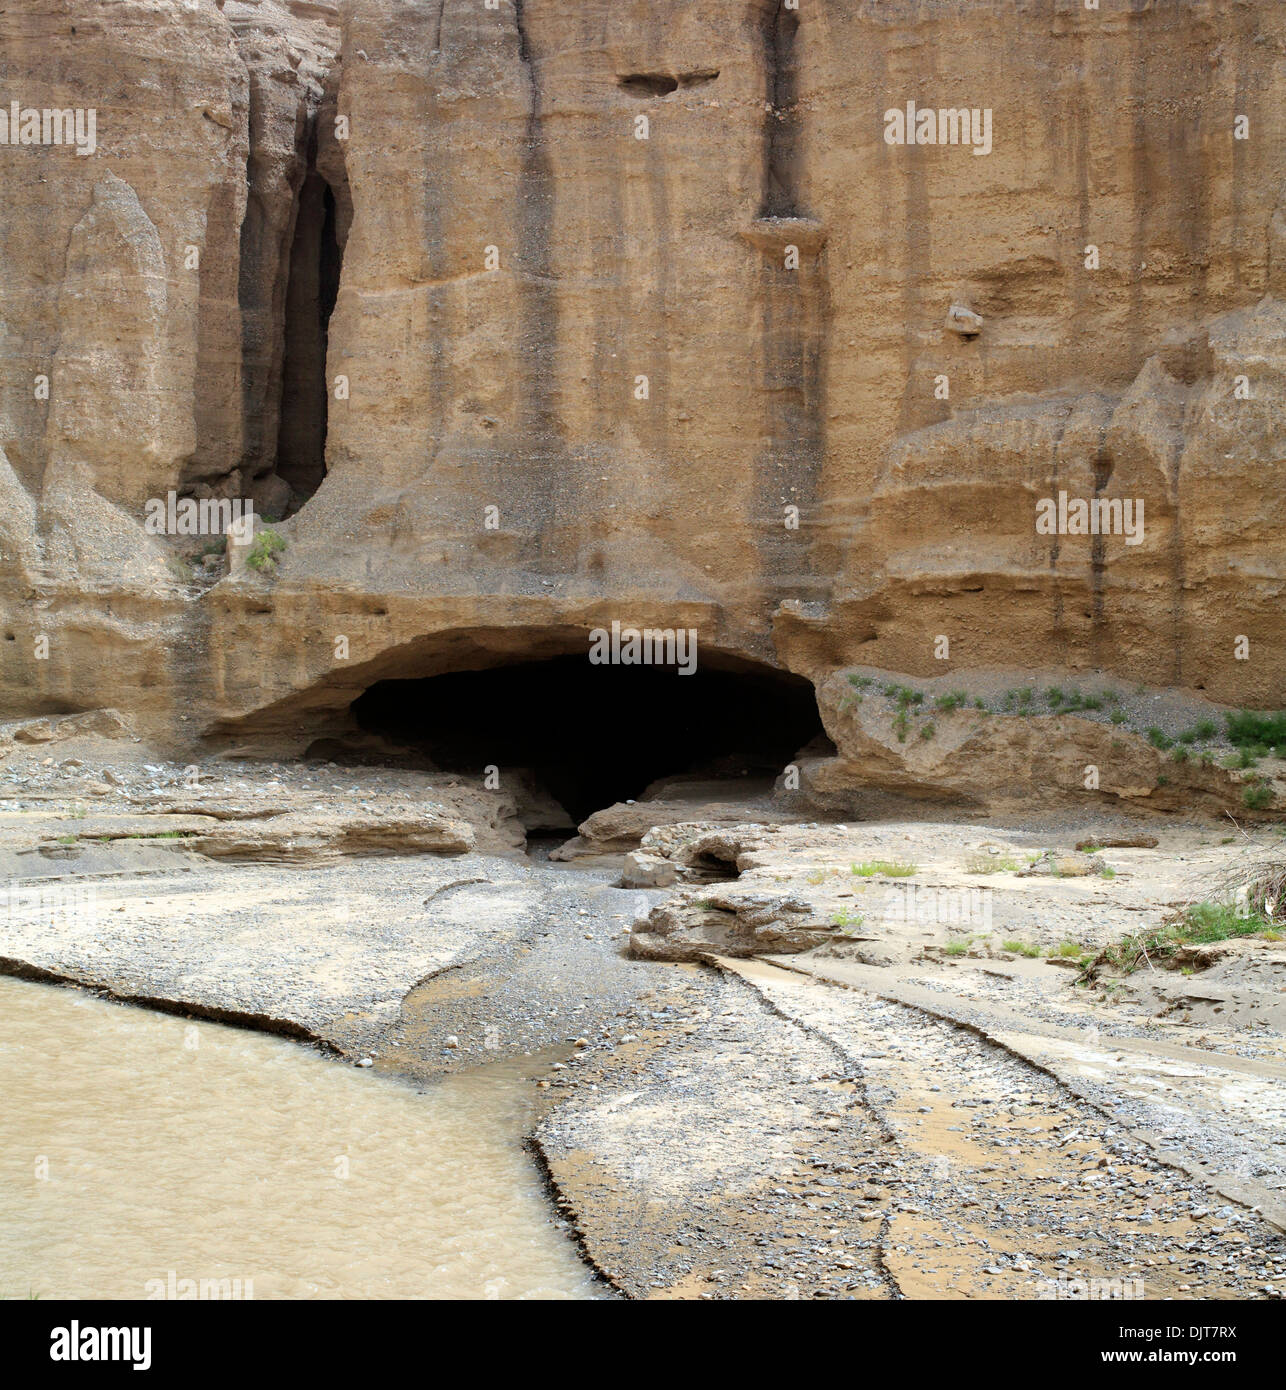 Yuilin valley and grottoes, Gansu province, China Stock Photo